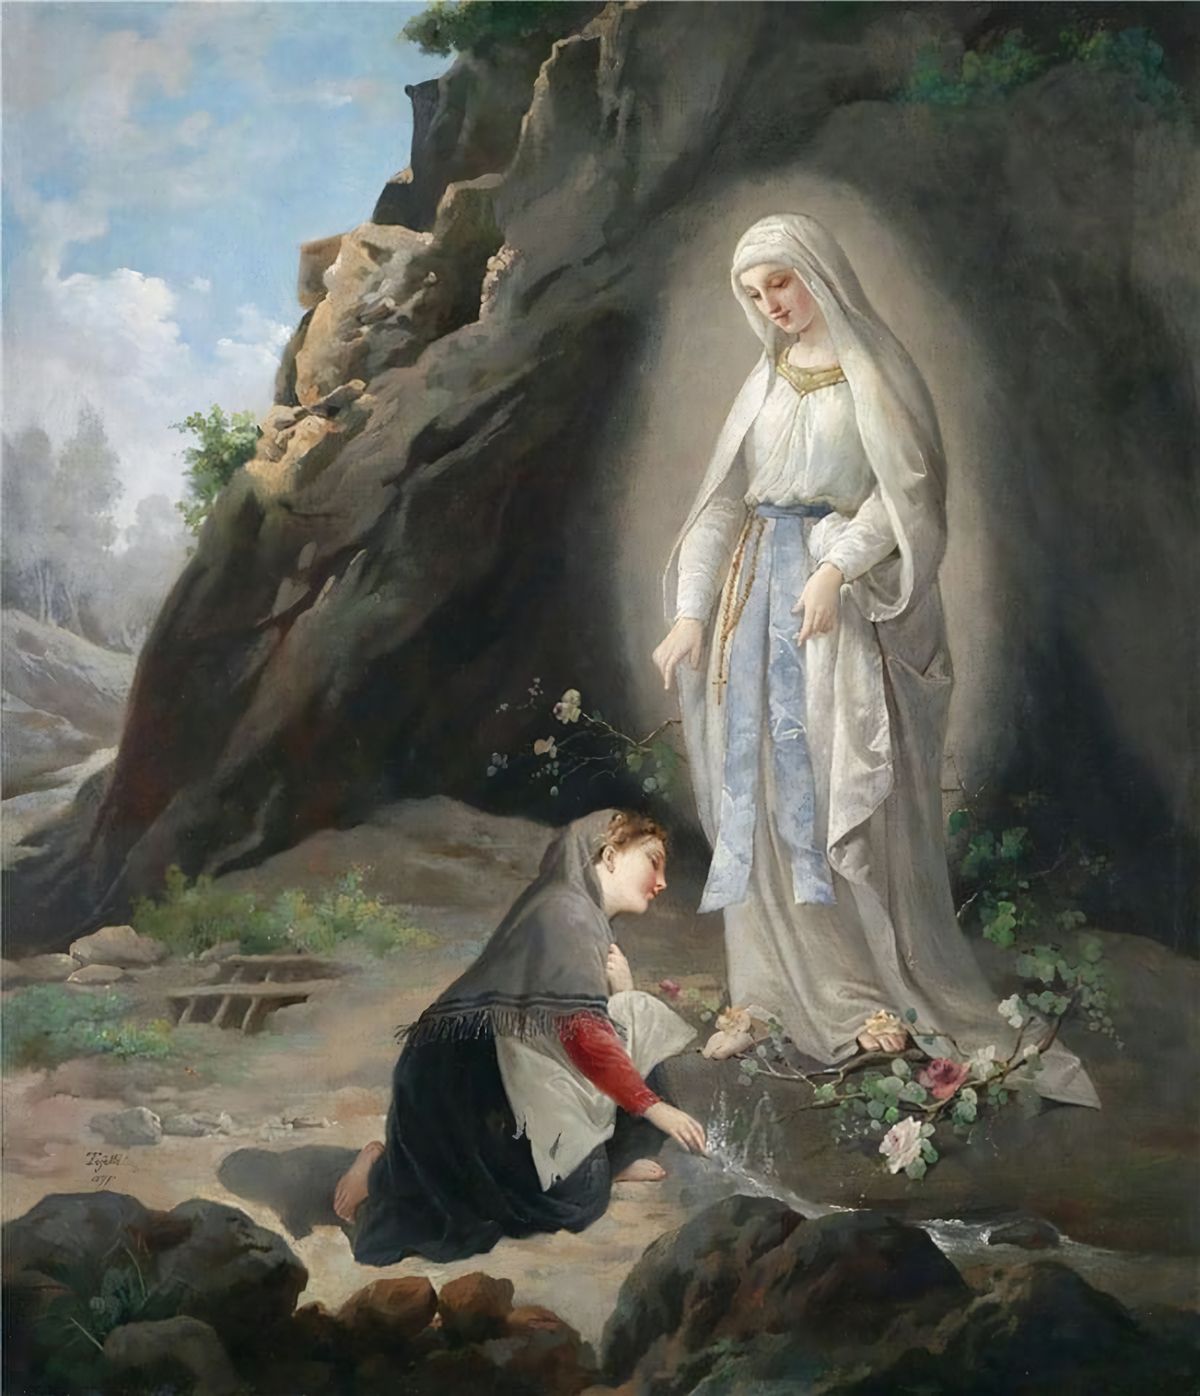 Our Lady of Lourdes (1877, Italy) by Virgilio Tojetti - Public Domain Catholic Painting